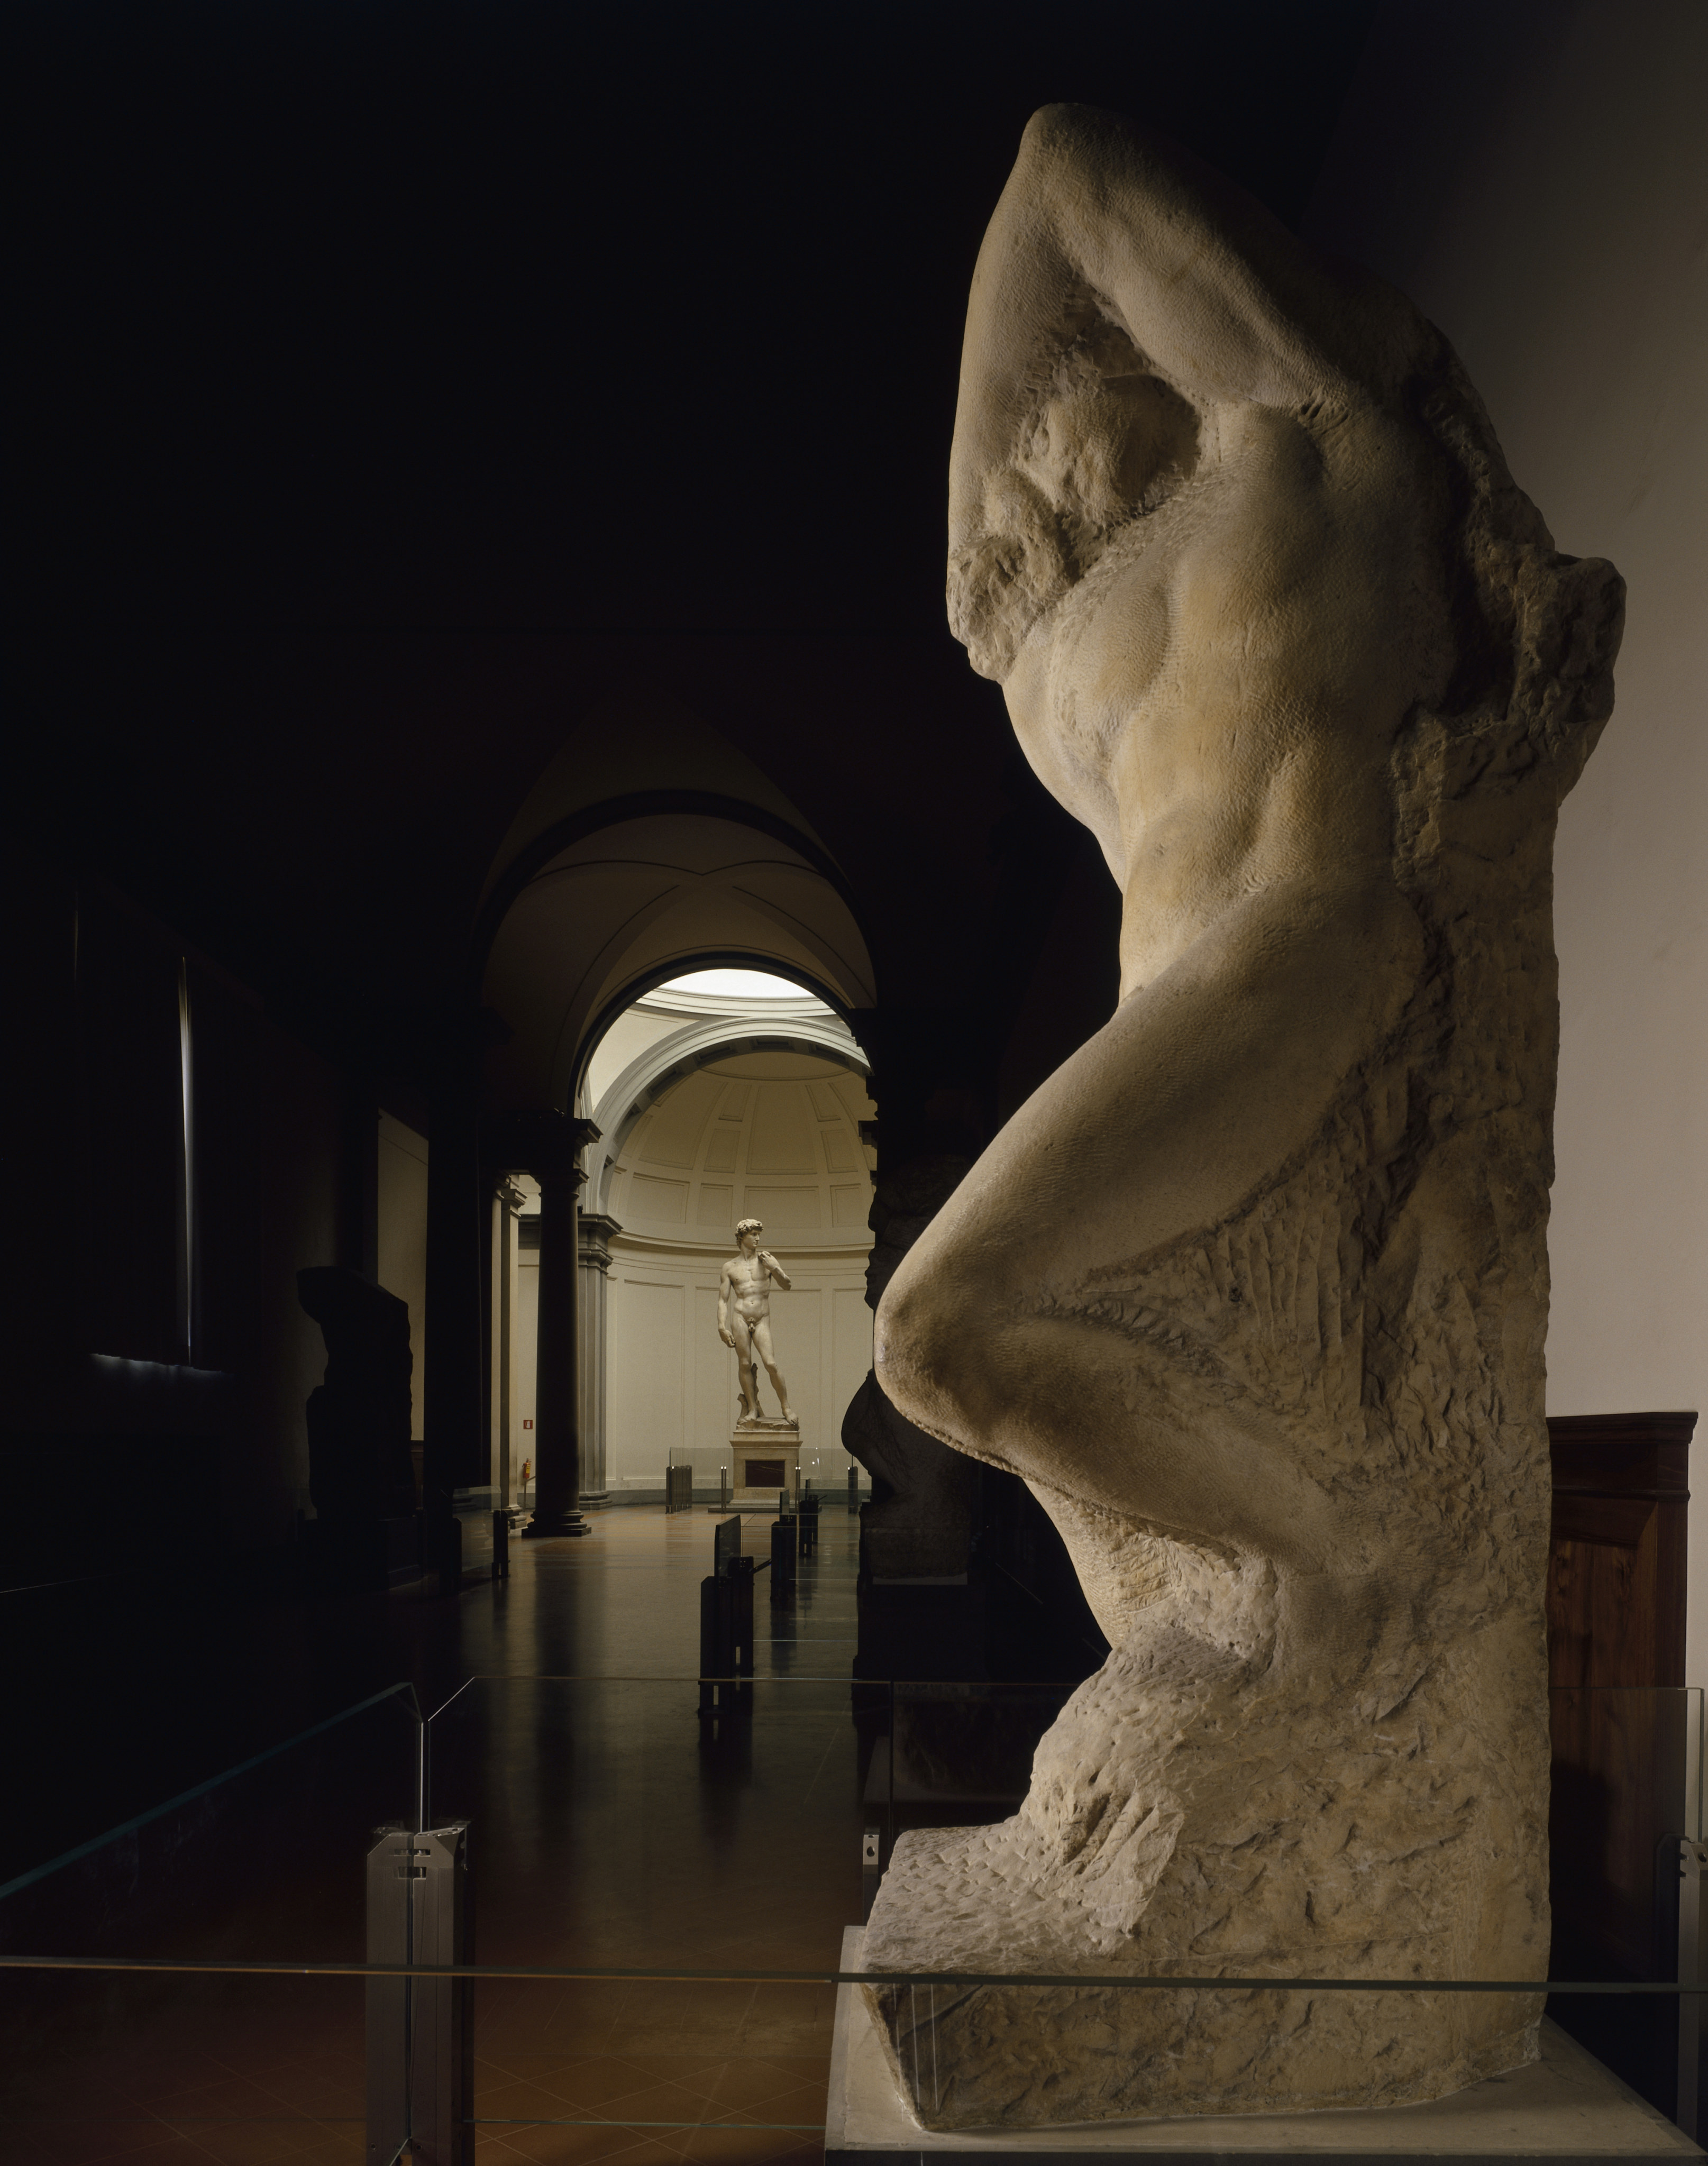 A statue on display in the Galleria dell’Accademia, Florence, Italy, home to Michelangelo’s David. Photo: Getty Images